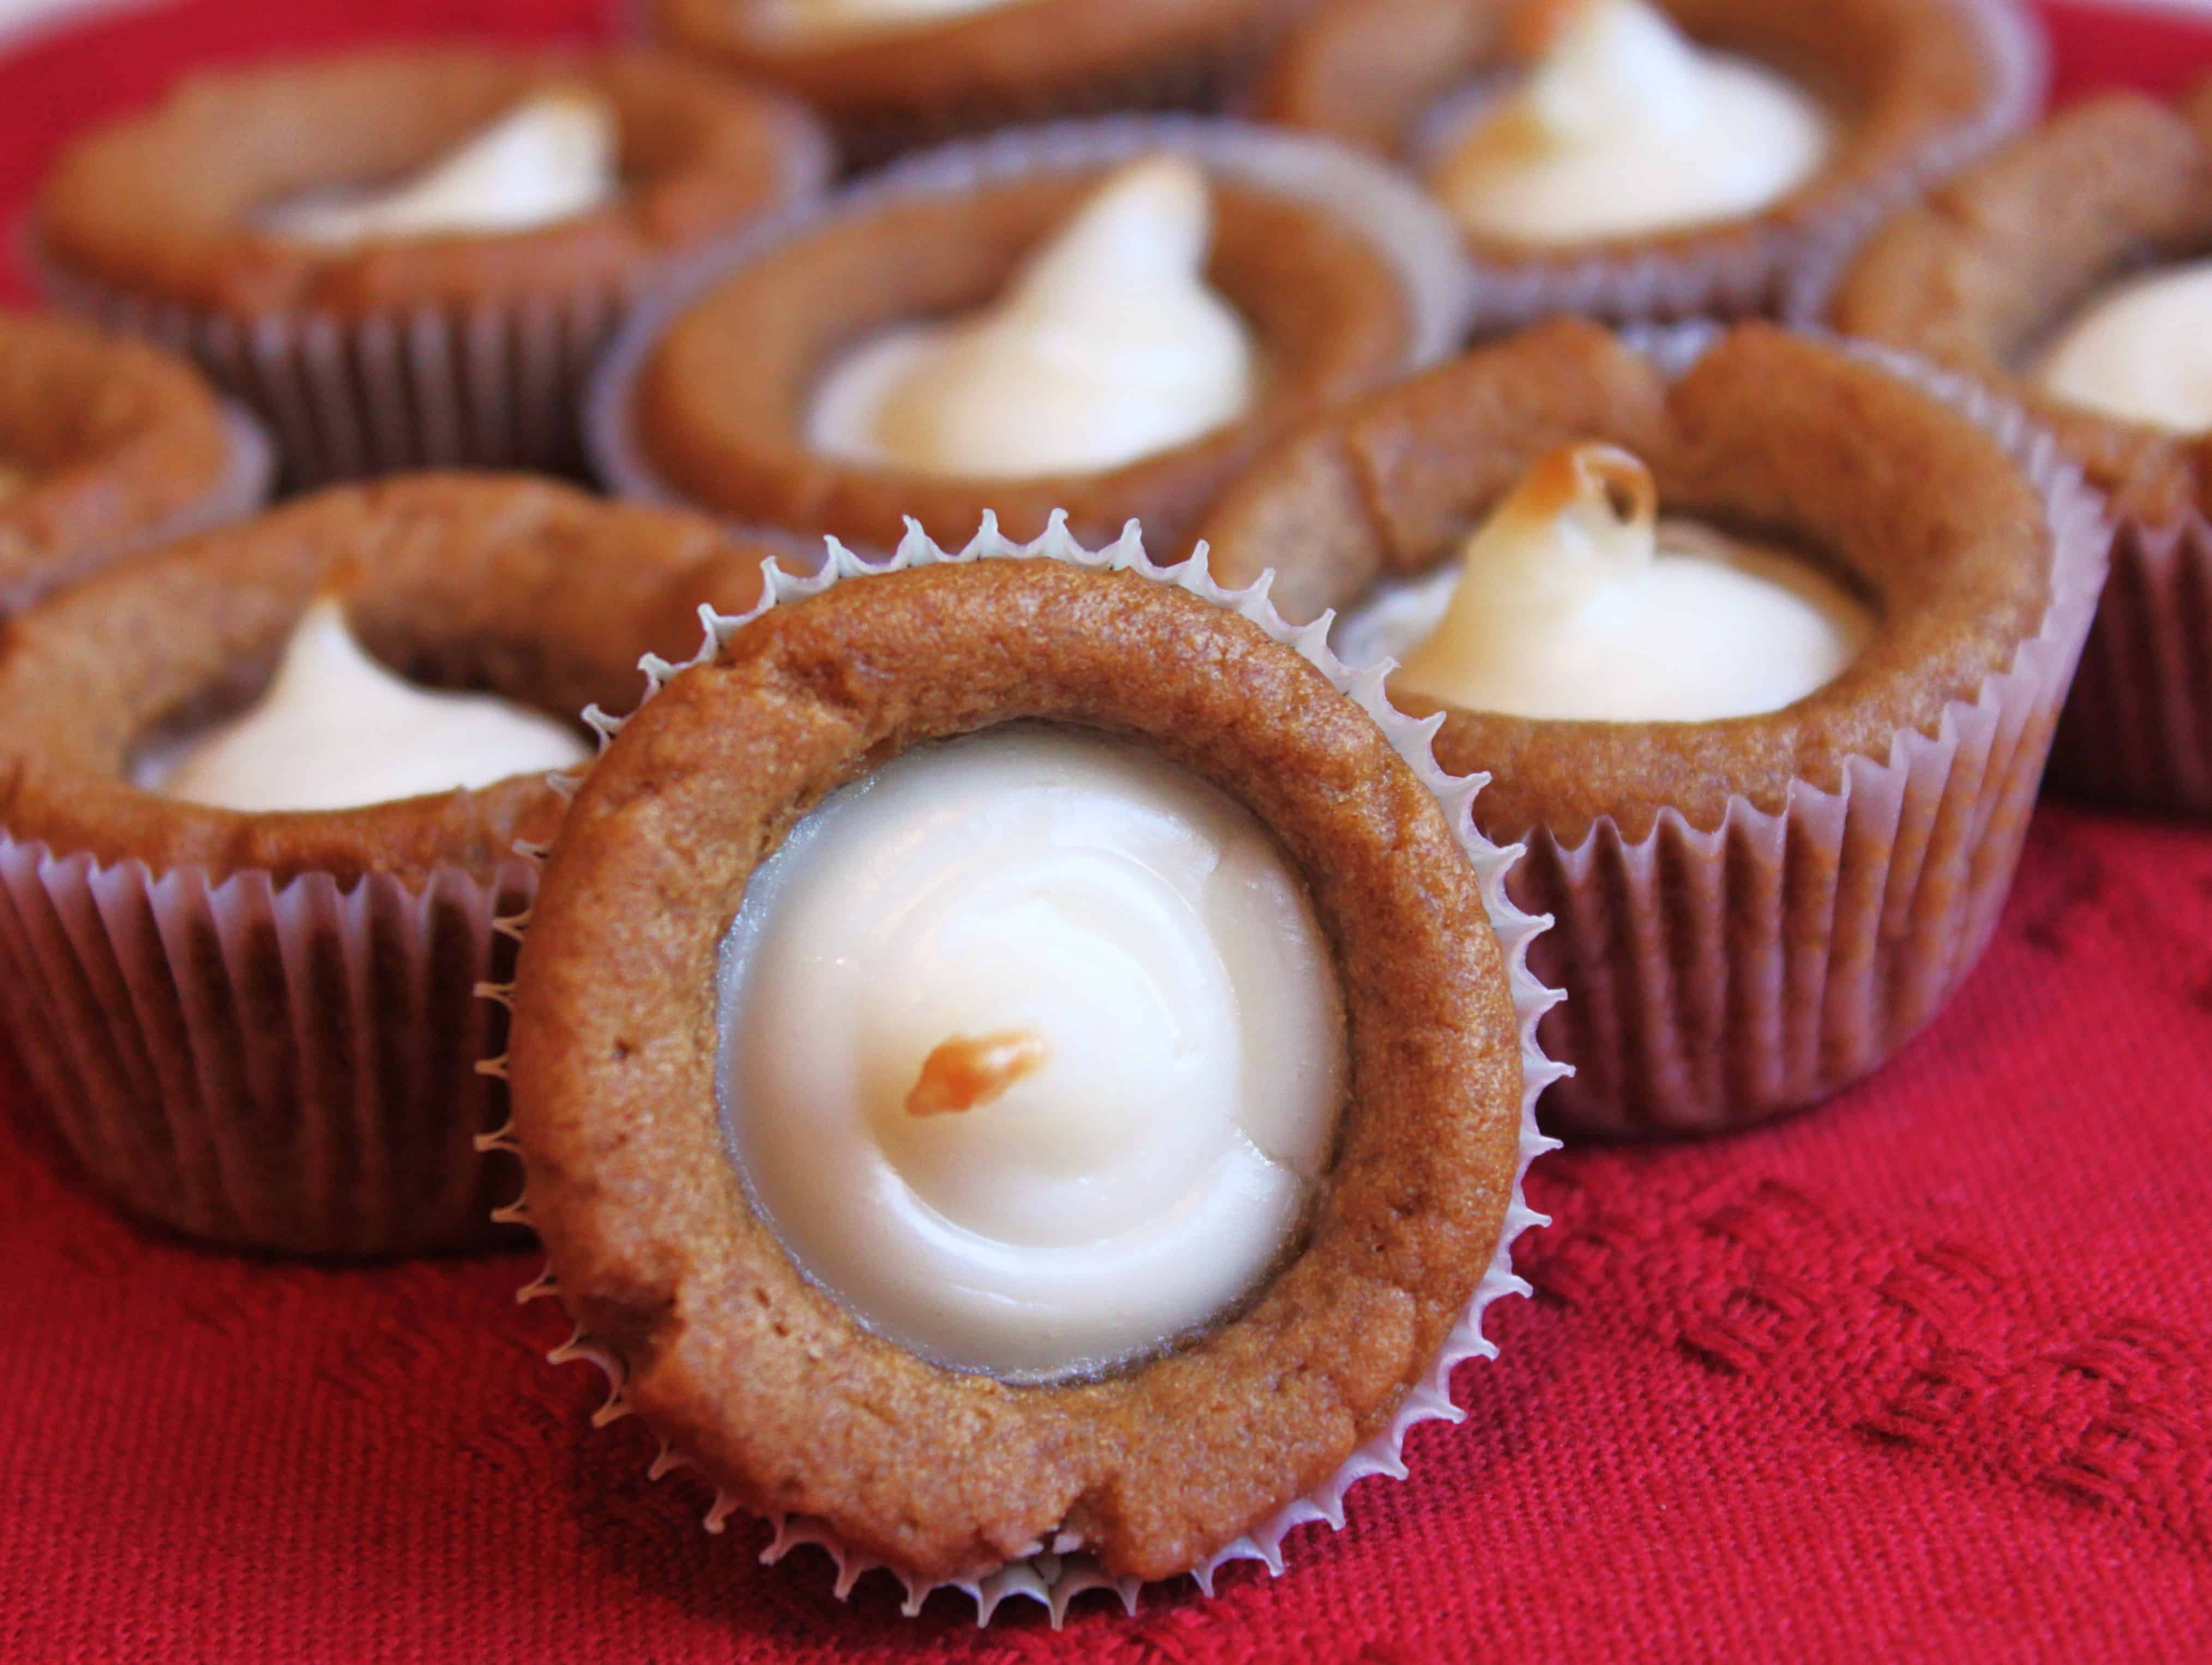 Pillsbury Gingerbread Cookie Dough with Cheesecake filling